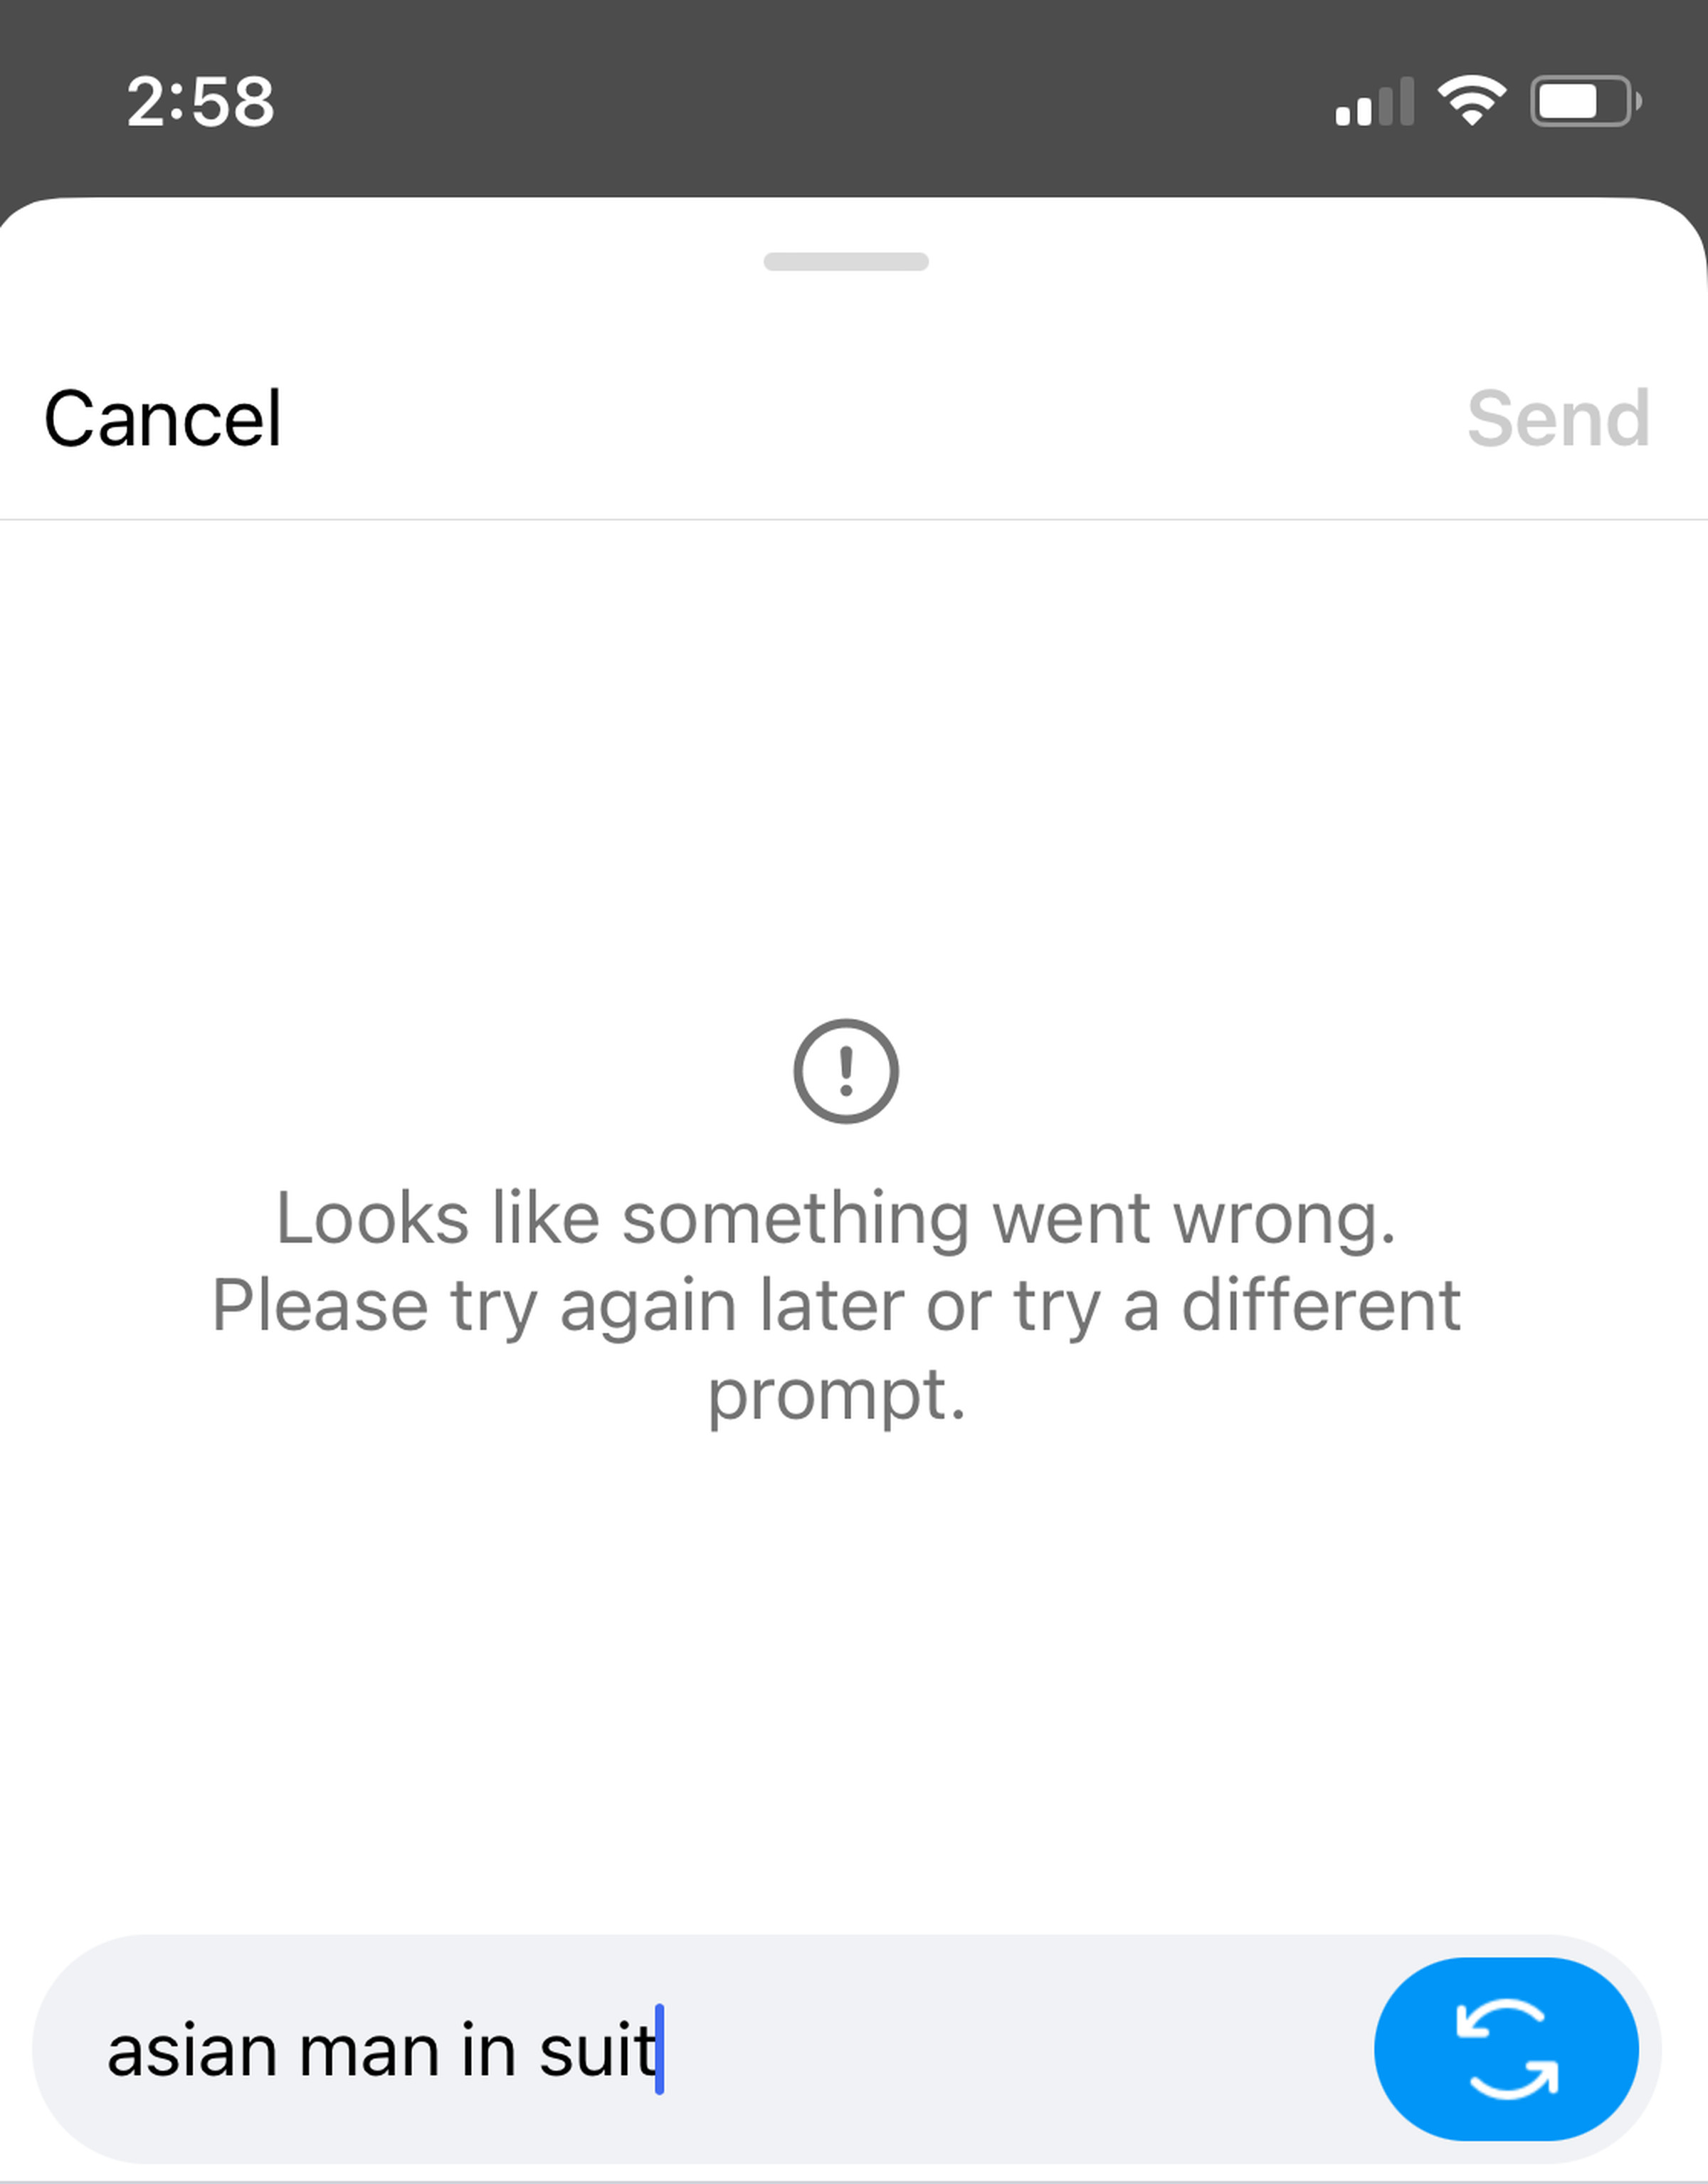 Instagram AI image generator with the suggested “white man in suit” with an error message